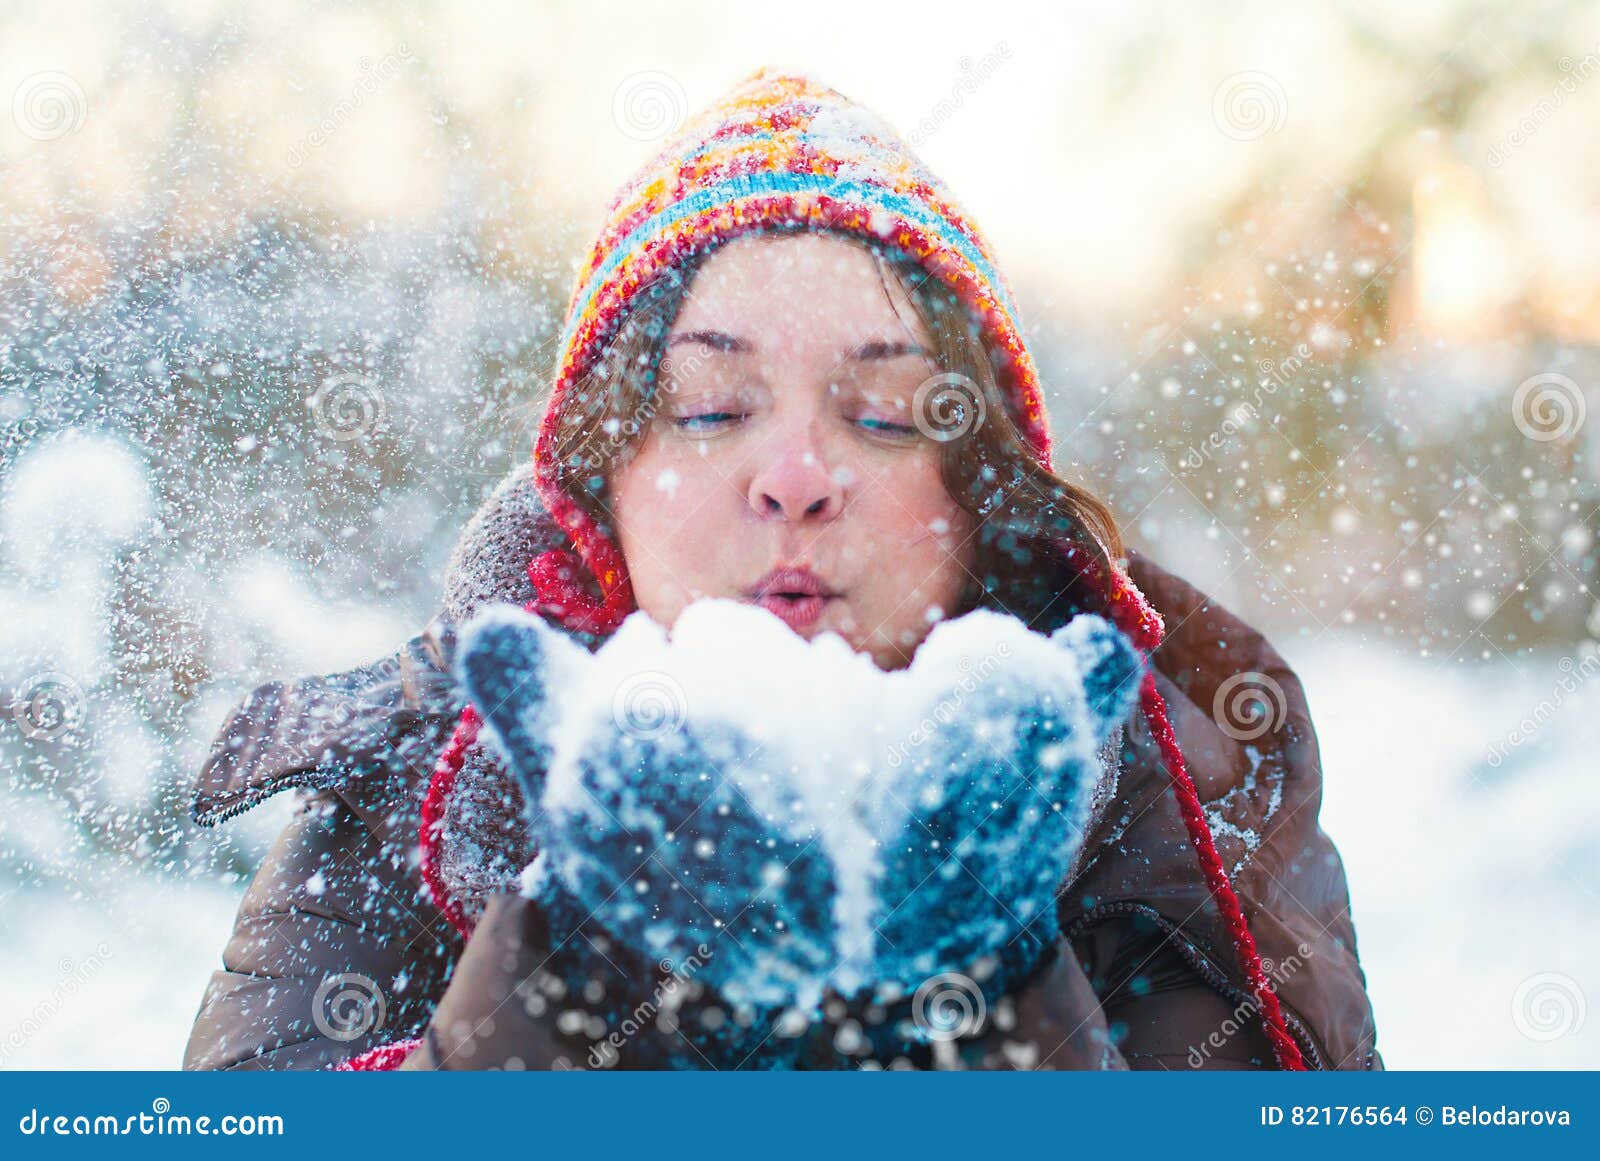 Beauty Winter Girl Blowing Snow in Frosty Park Stock Photo - Image of ...